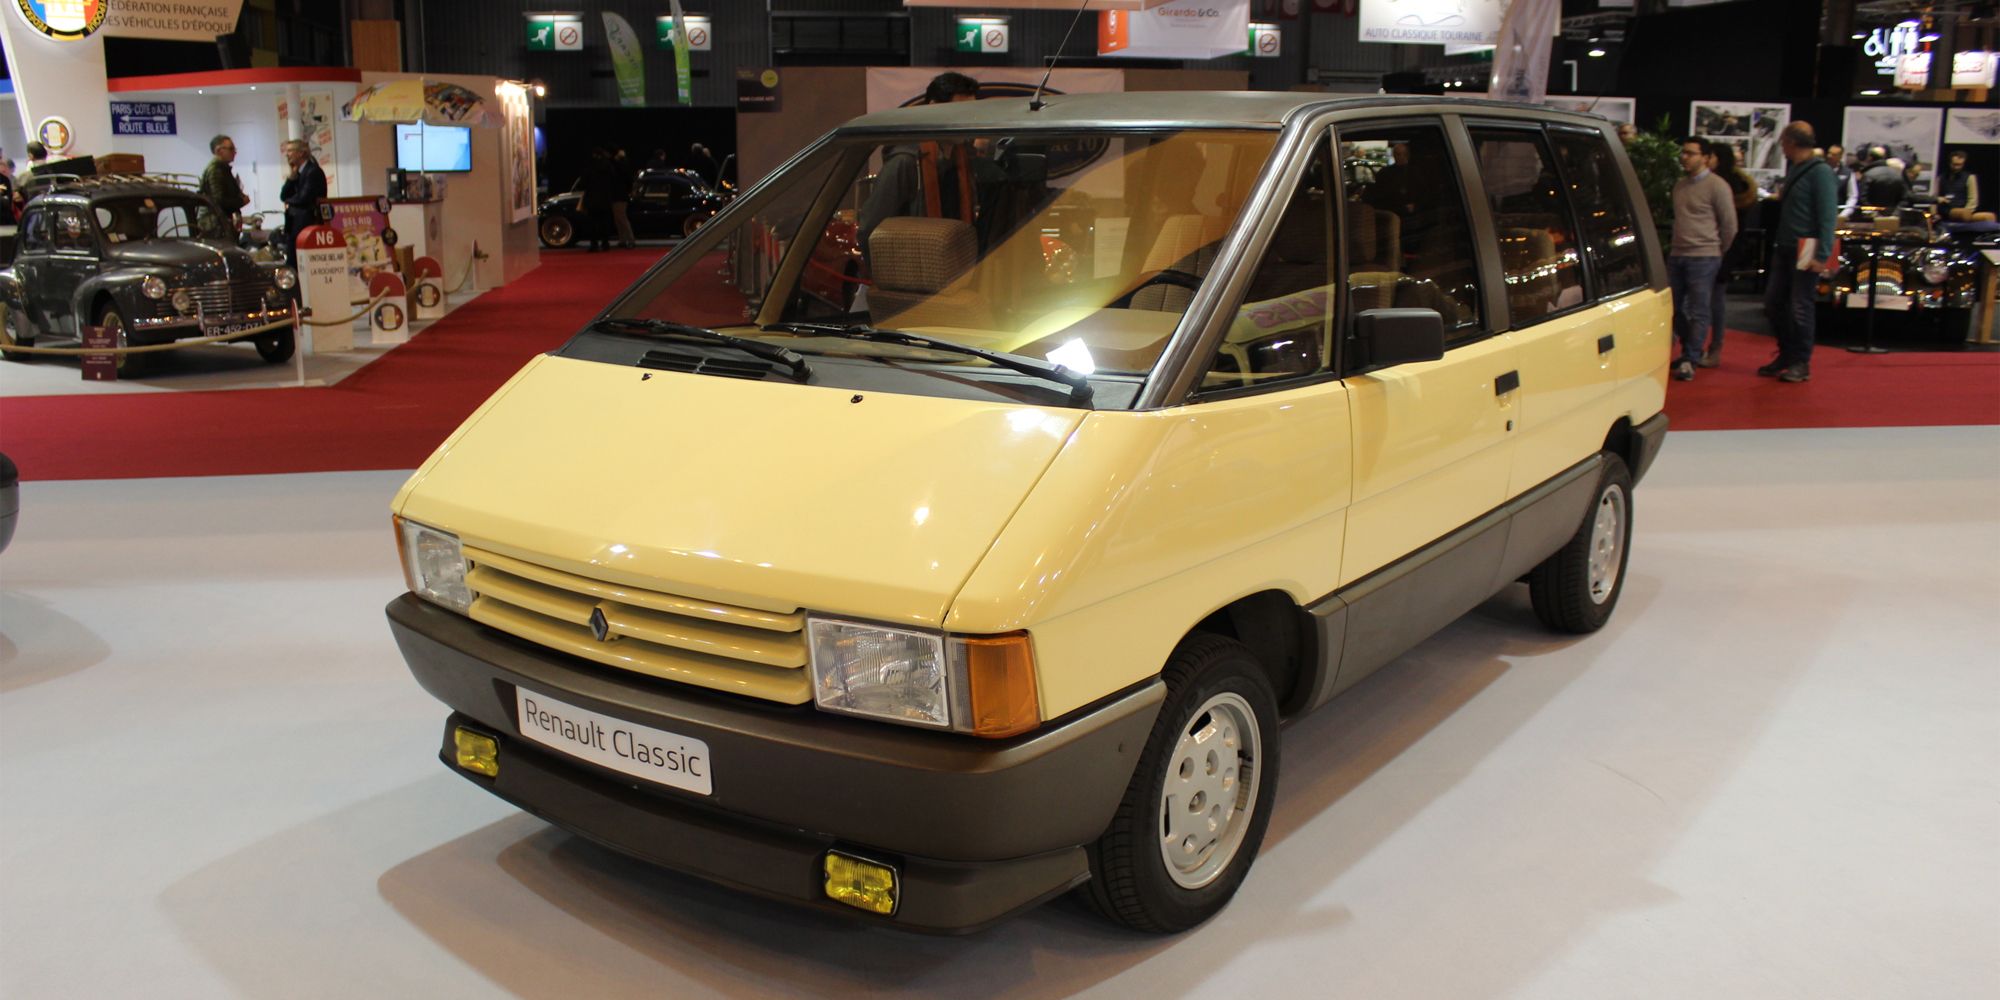 An original Espace in yellow and gray